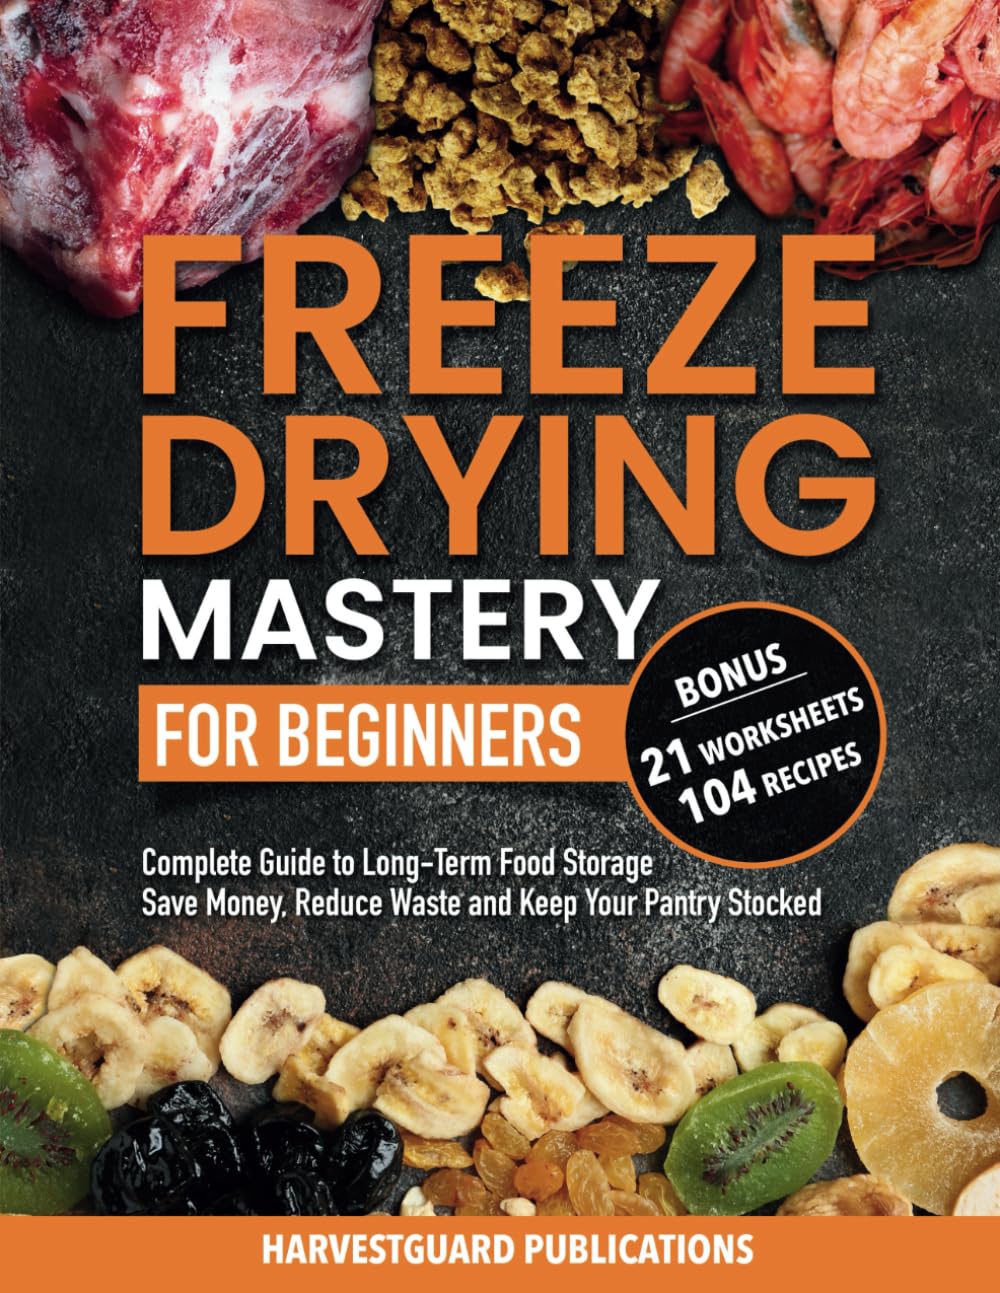 Freeze Drying Mastery For Beginners: Complete Guide to Long-Term Food Storage, Save Money, Reduce Waste and Keep Your Pantry Stocked